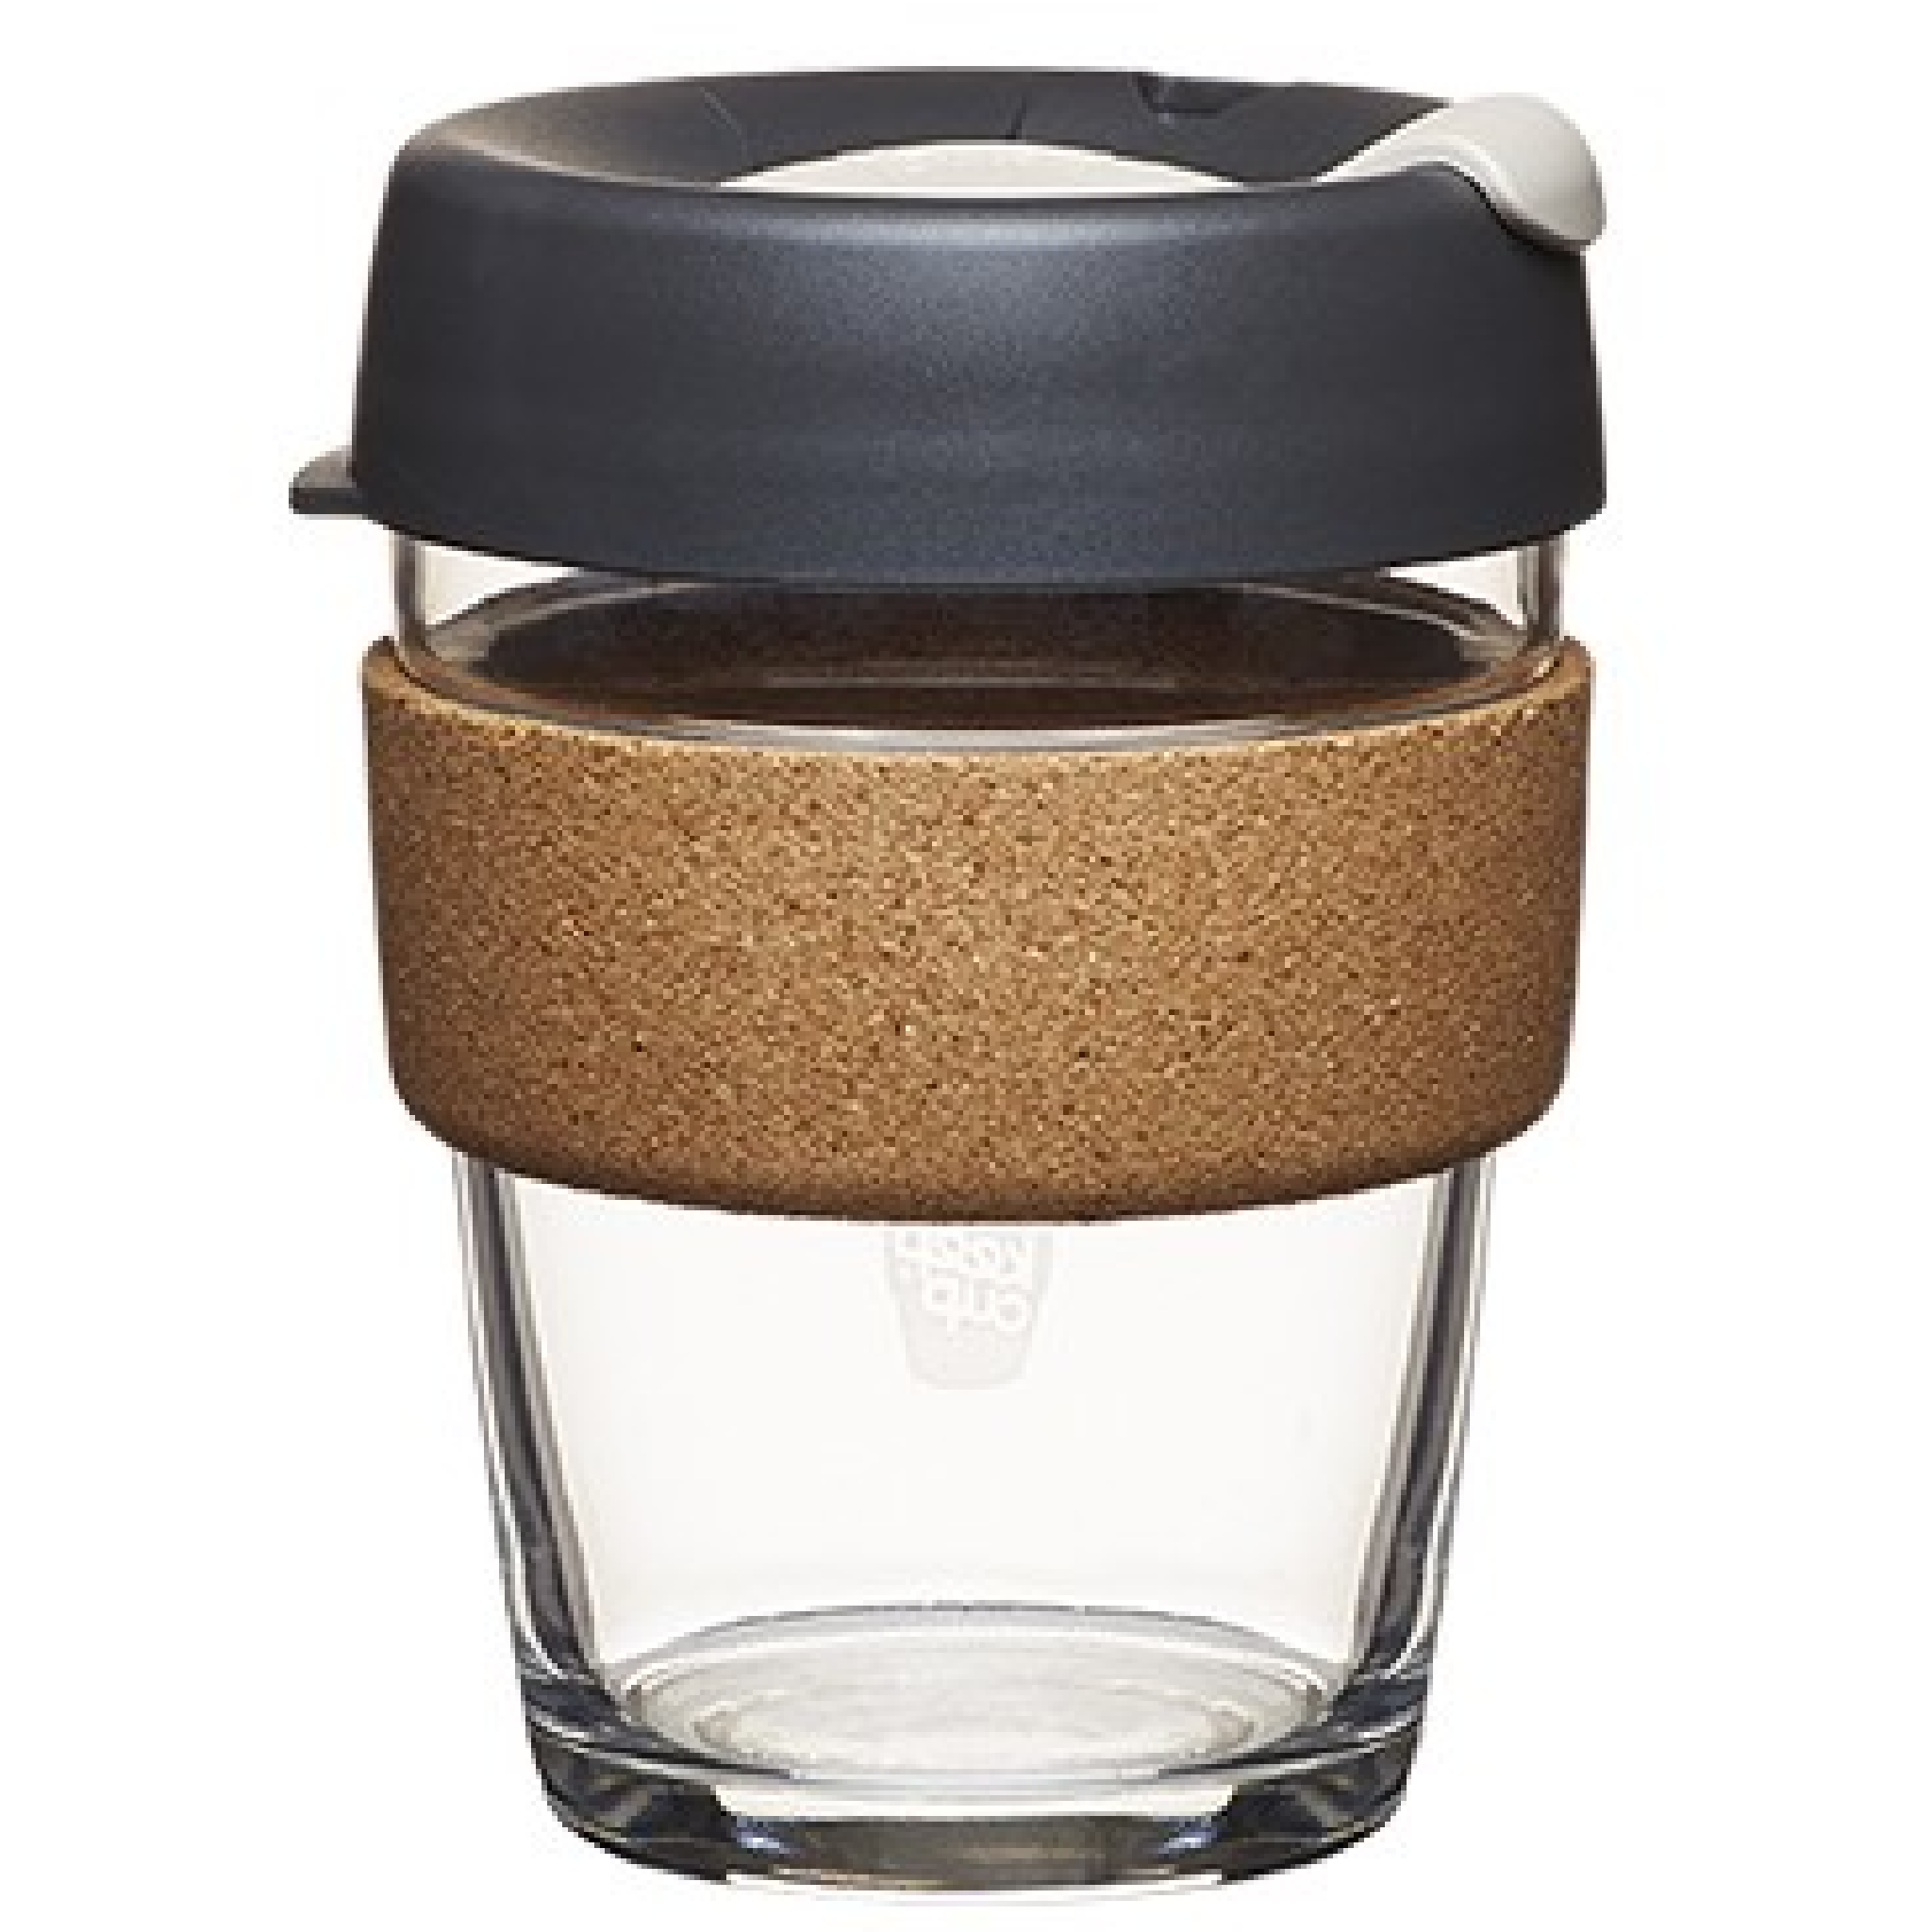 This Is The KeepCup 